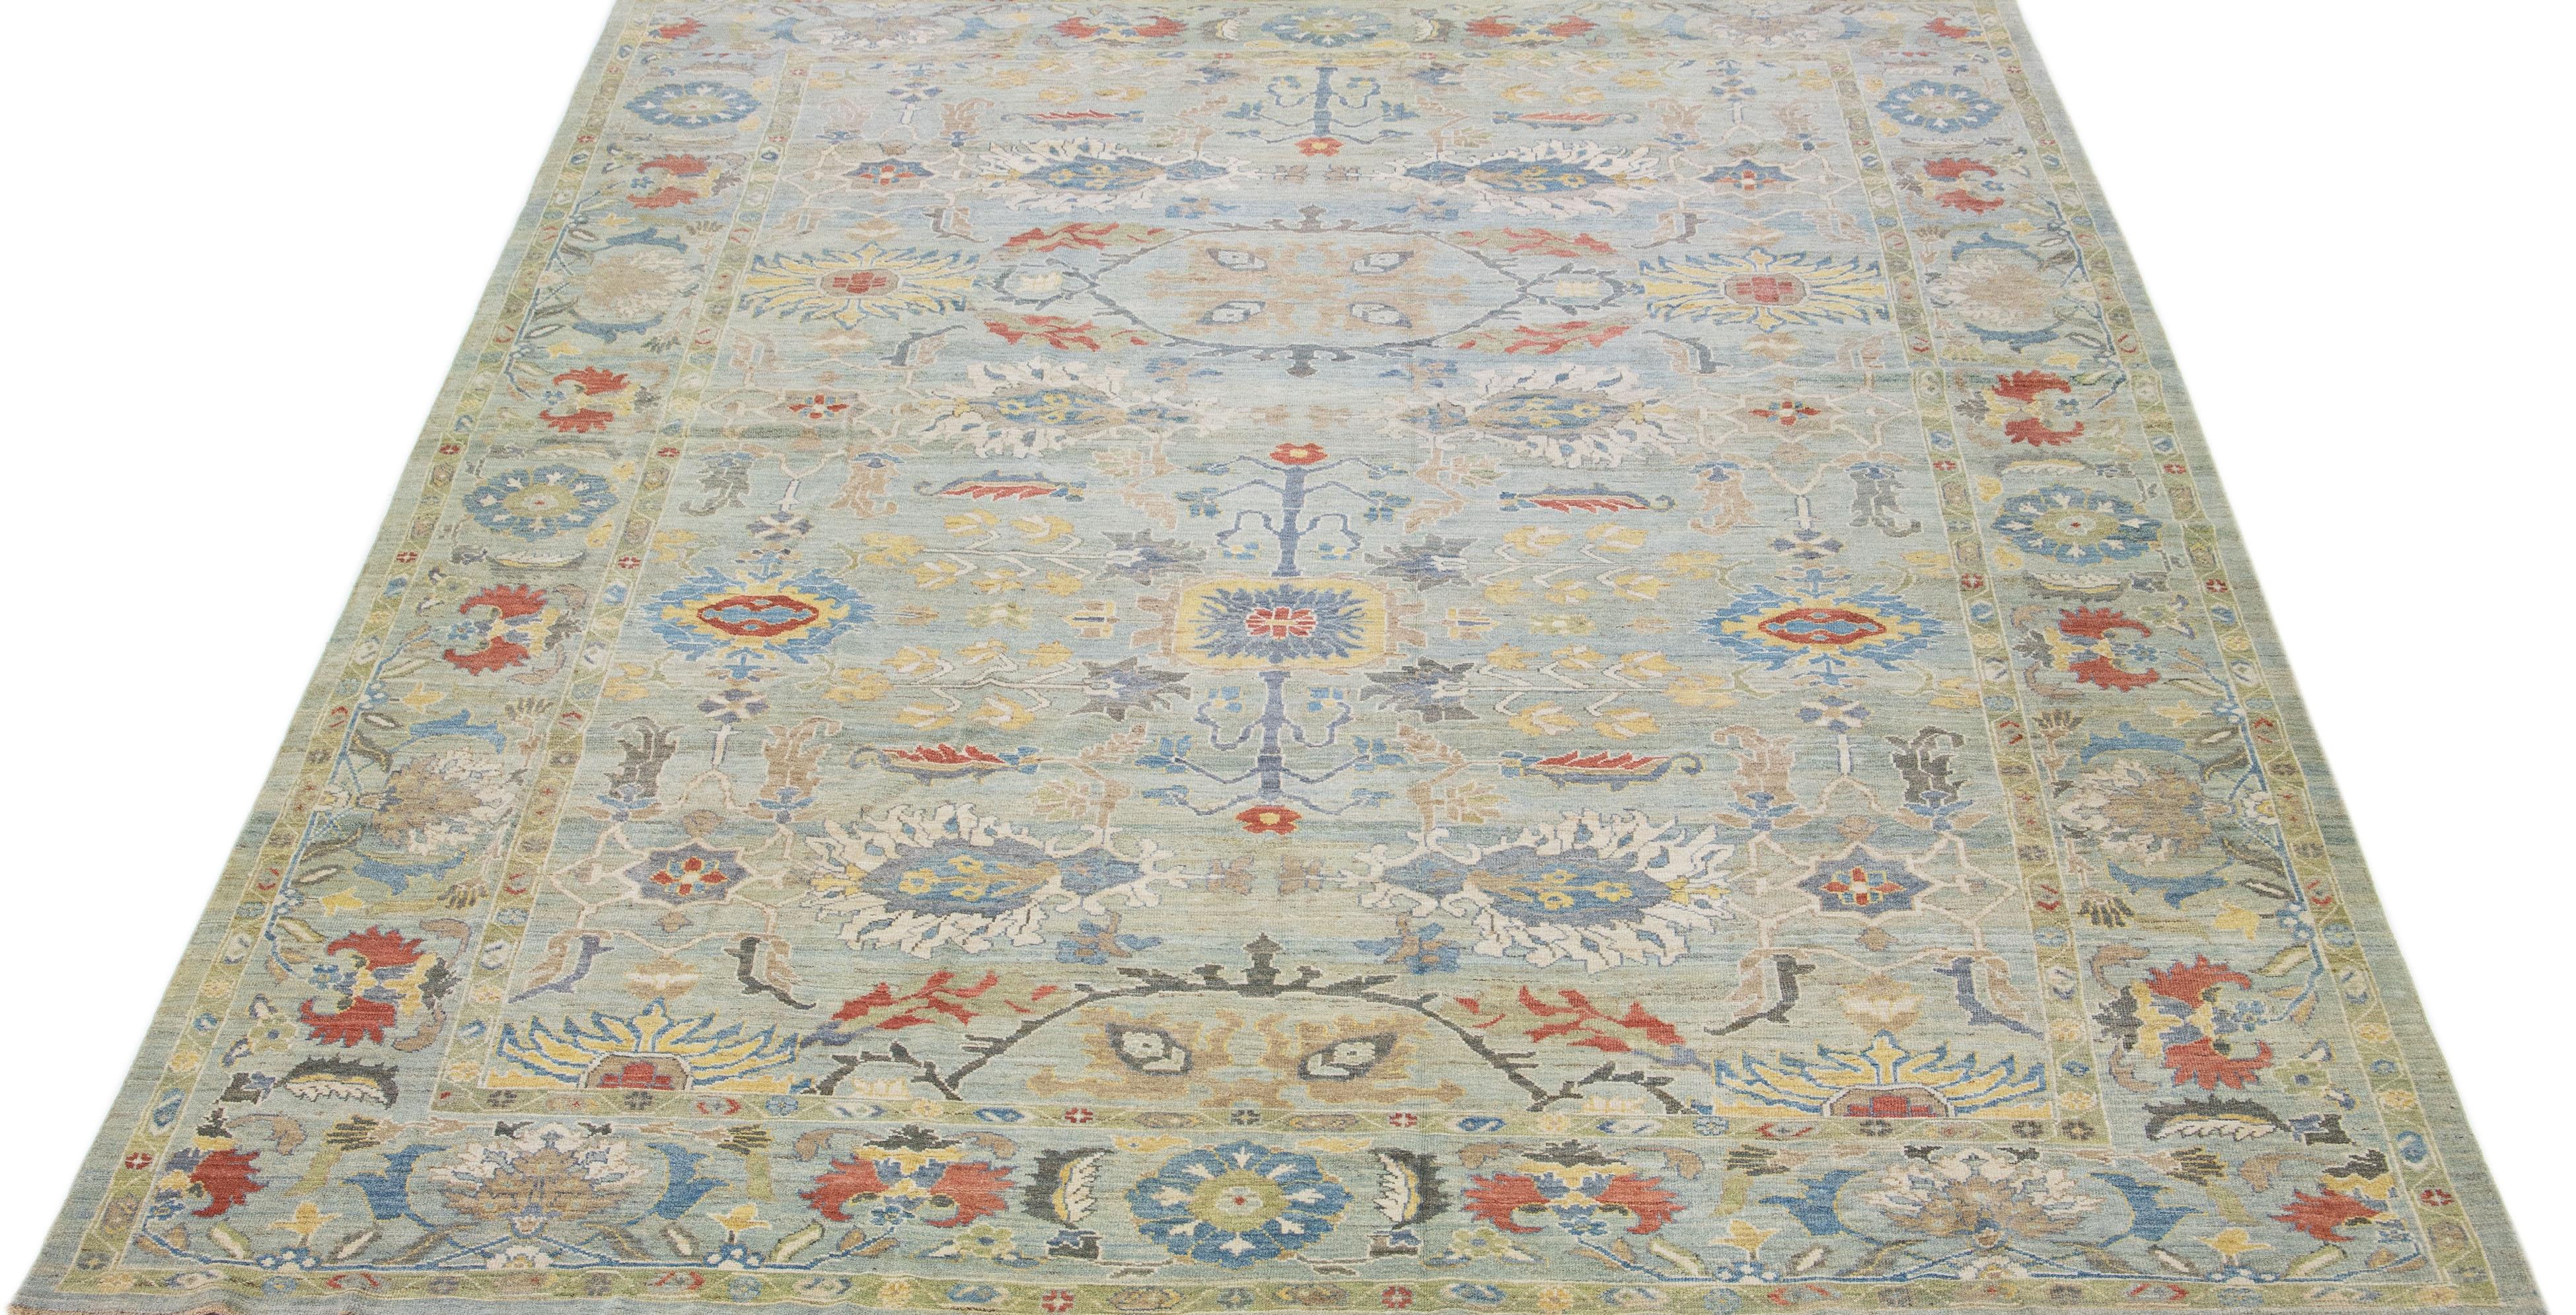 Beautiful modern Sultanabad hand knotted wool rug with a green and blue color field. This rug has a designed frame with multicolor accents in a gorgeous all-over floral design.

This rug measures: 12' x 16.3